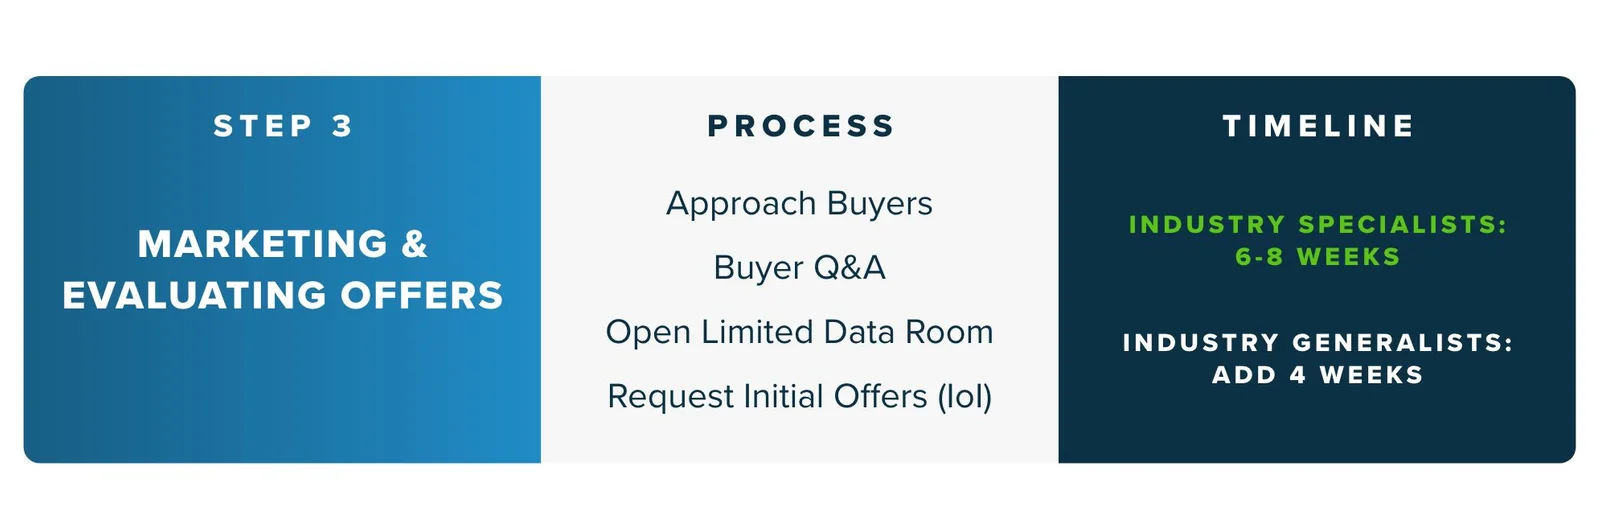 Step 3 of Exitwise M&A Process:  Marketing & Evaluating Offers